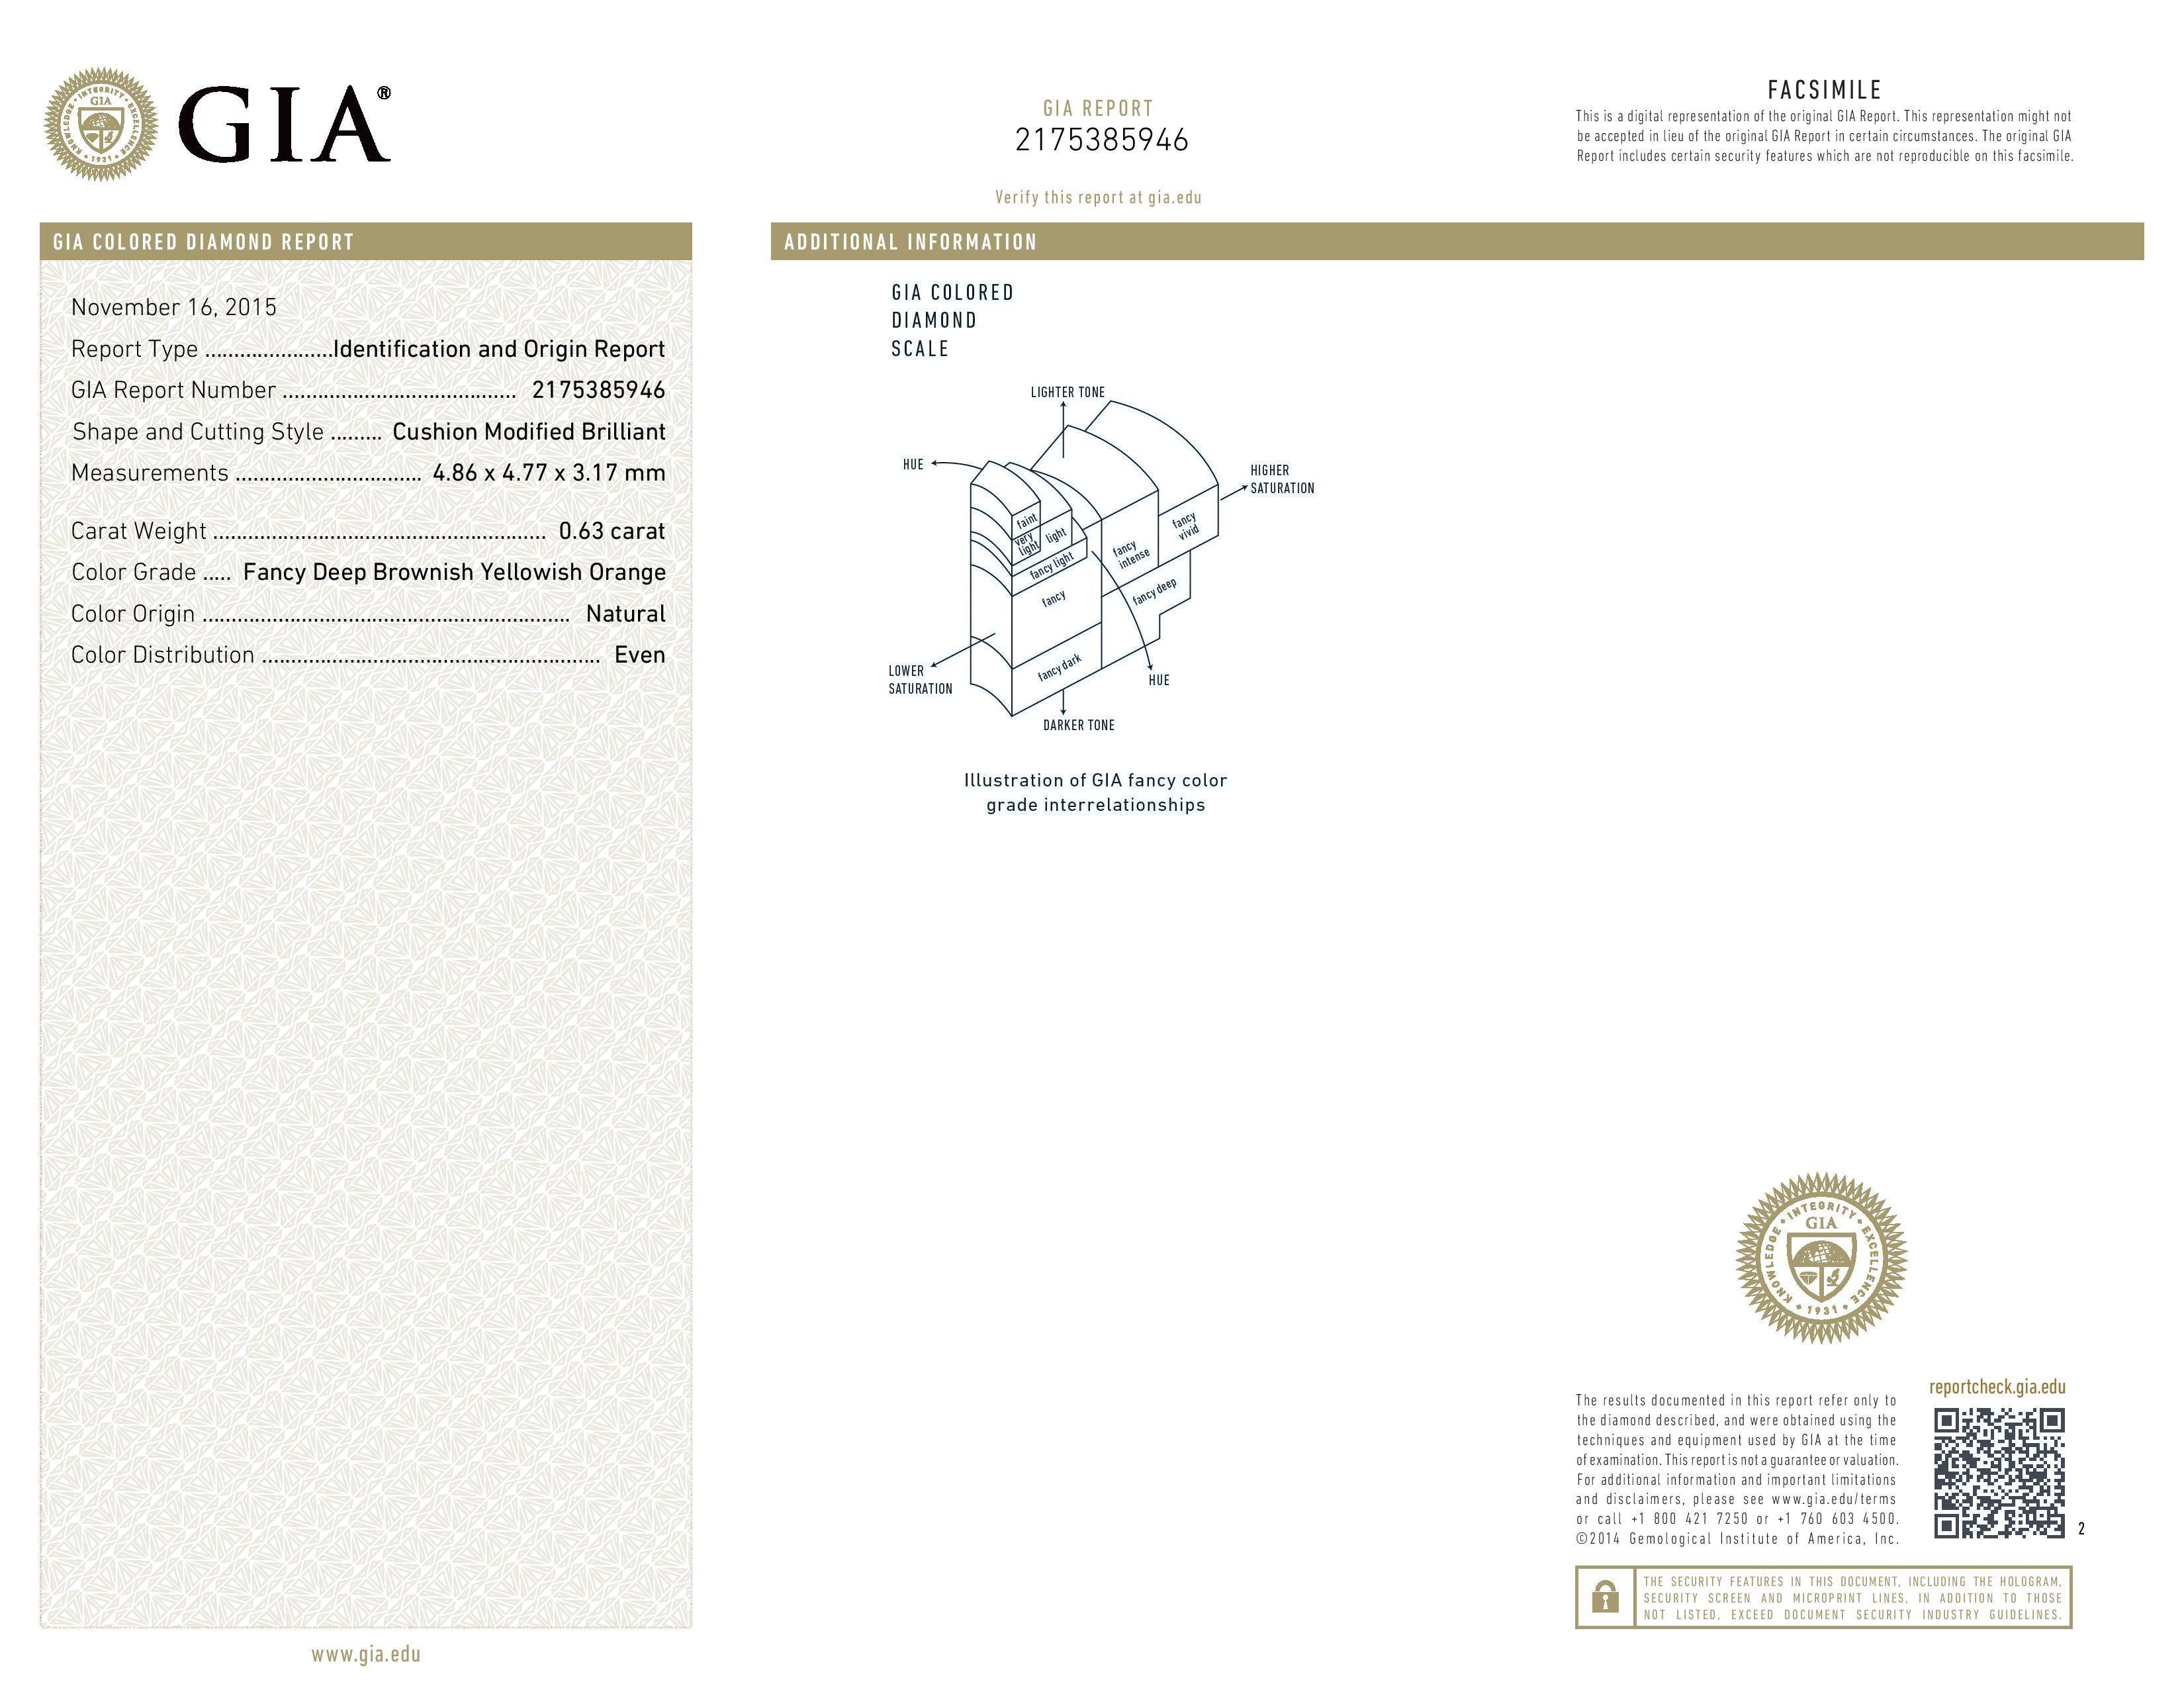 An unusual, GIA certified, 0.63ct fancy deep brownish yellowish orange cushion diamond, 18K white gold ring, surrounded by a total of 0.29ct round brilliant diamonds.
Size 6. Re-sizing is complimentary upon request.
GIA certificate is attached.
